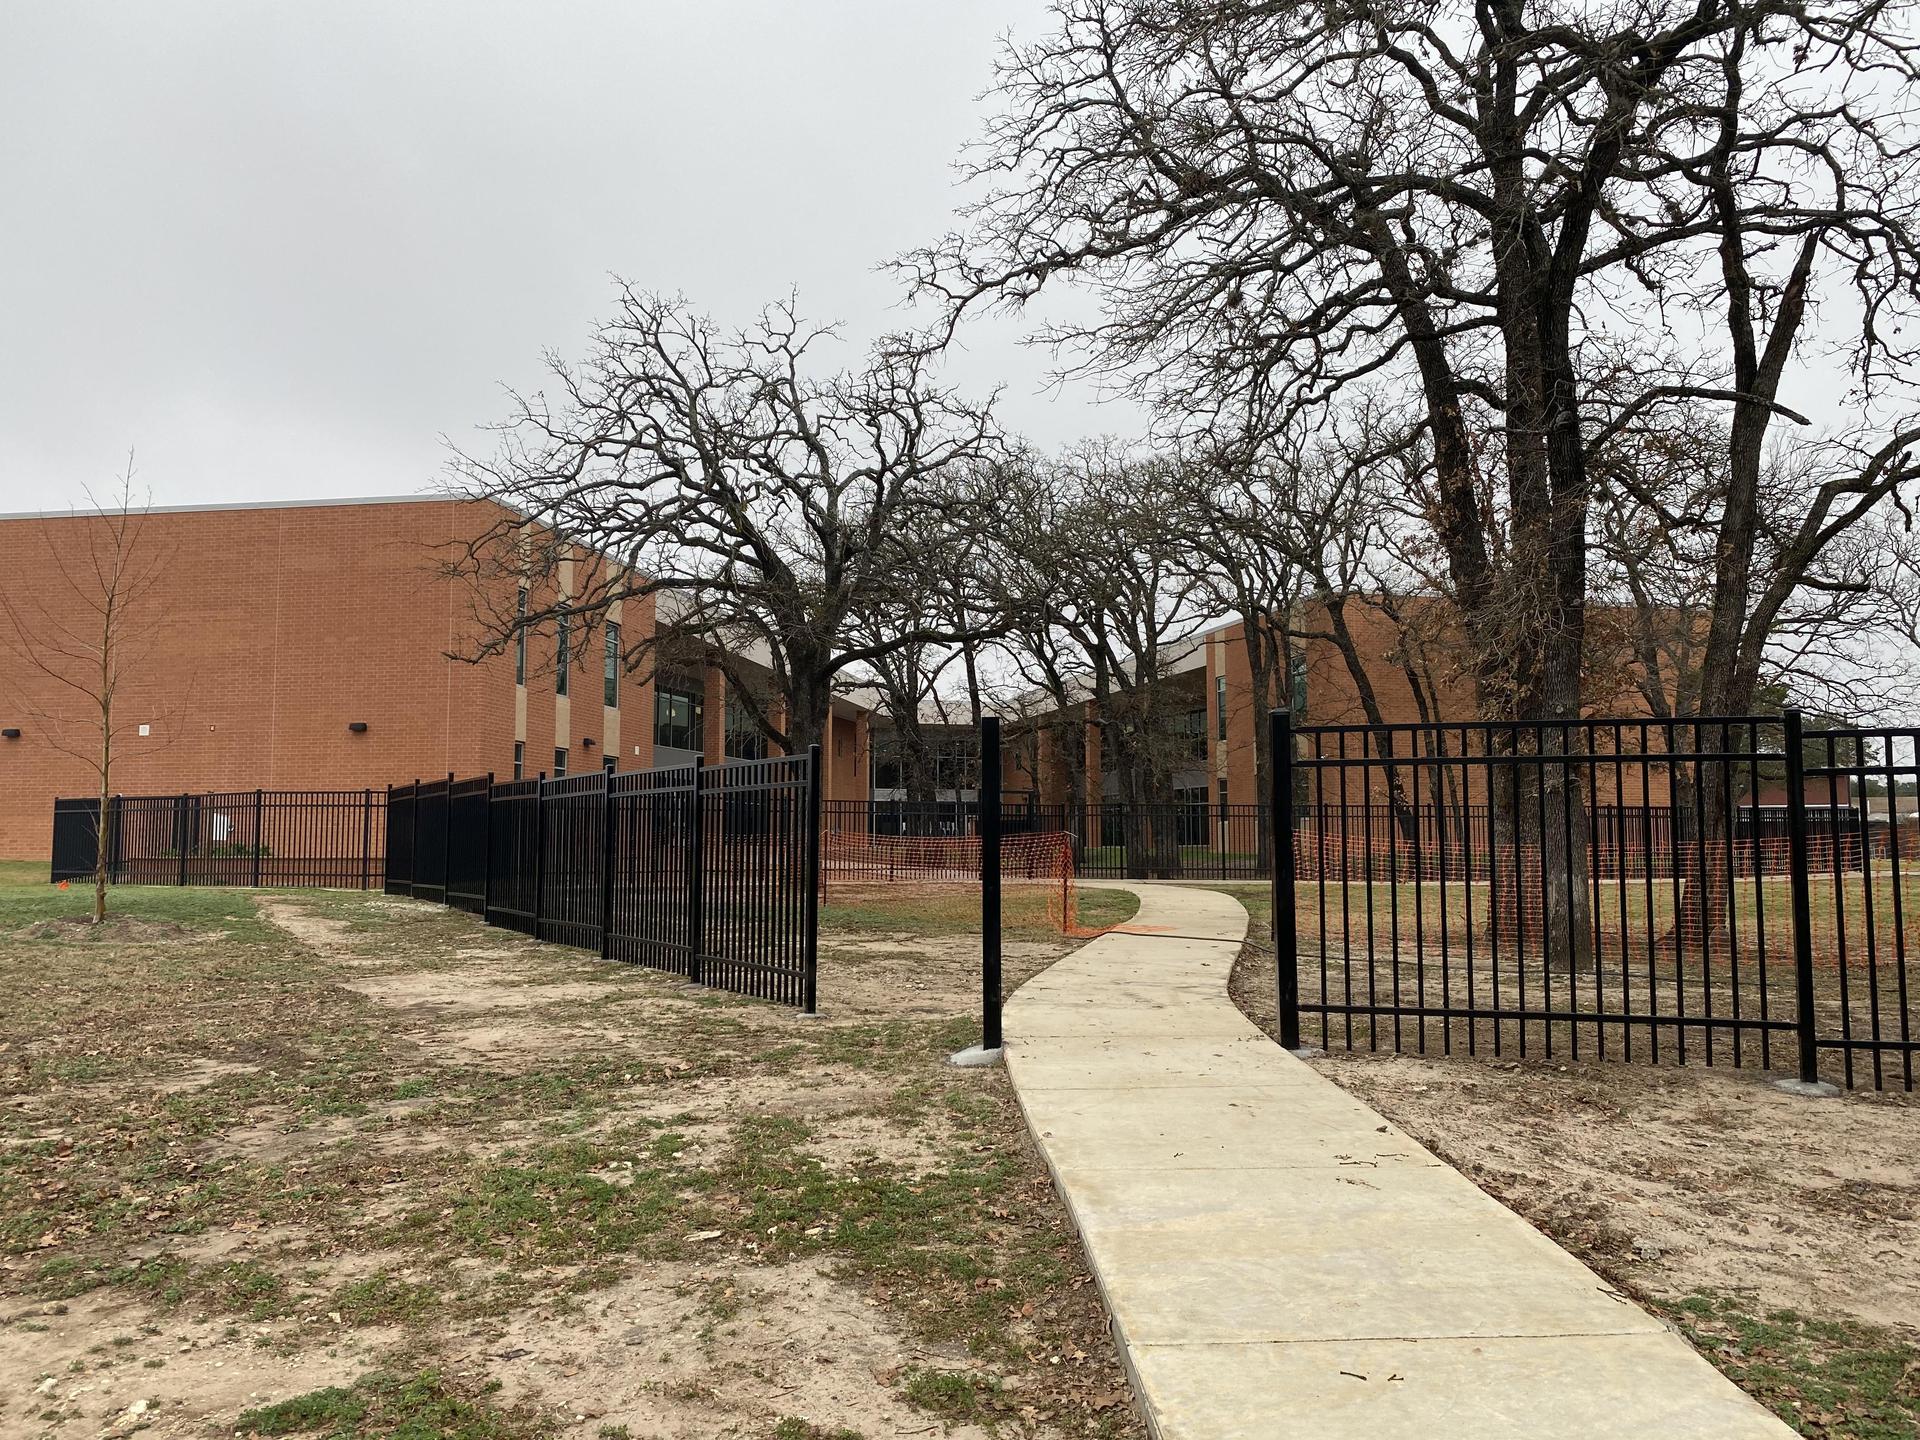 A schoolyard with an iron fence